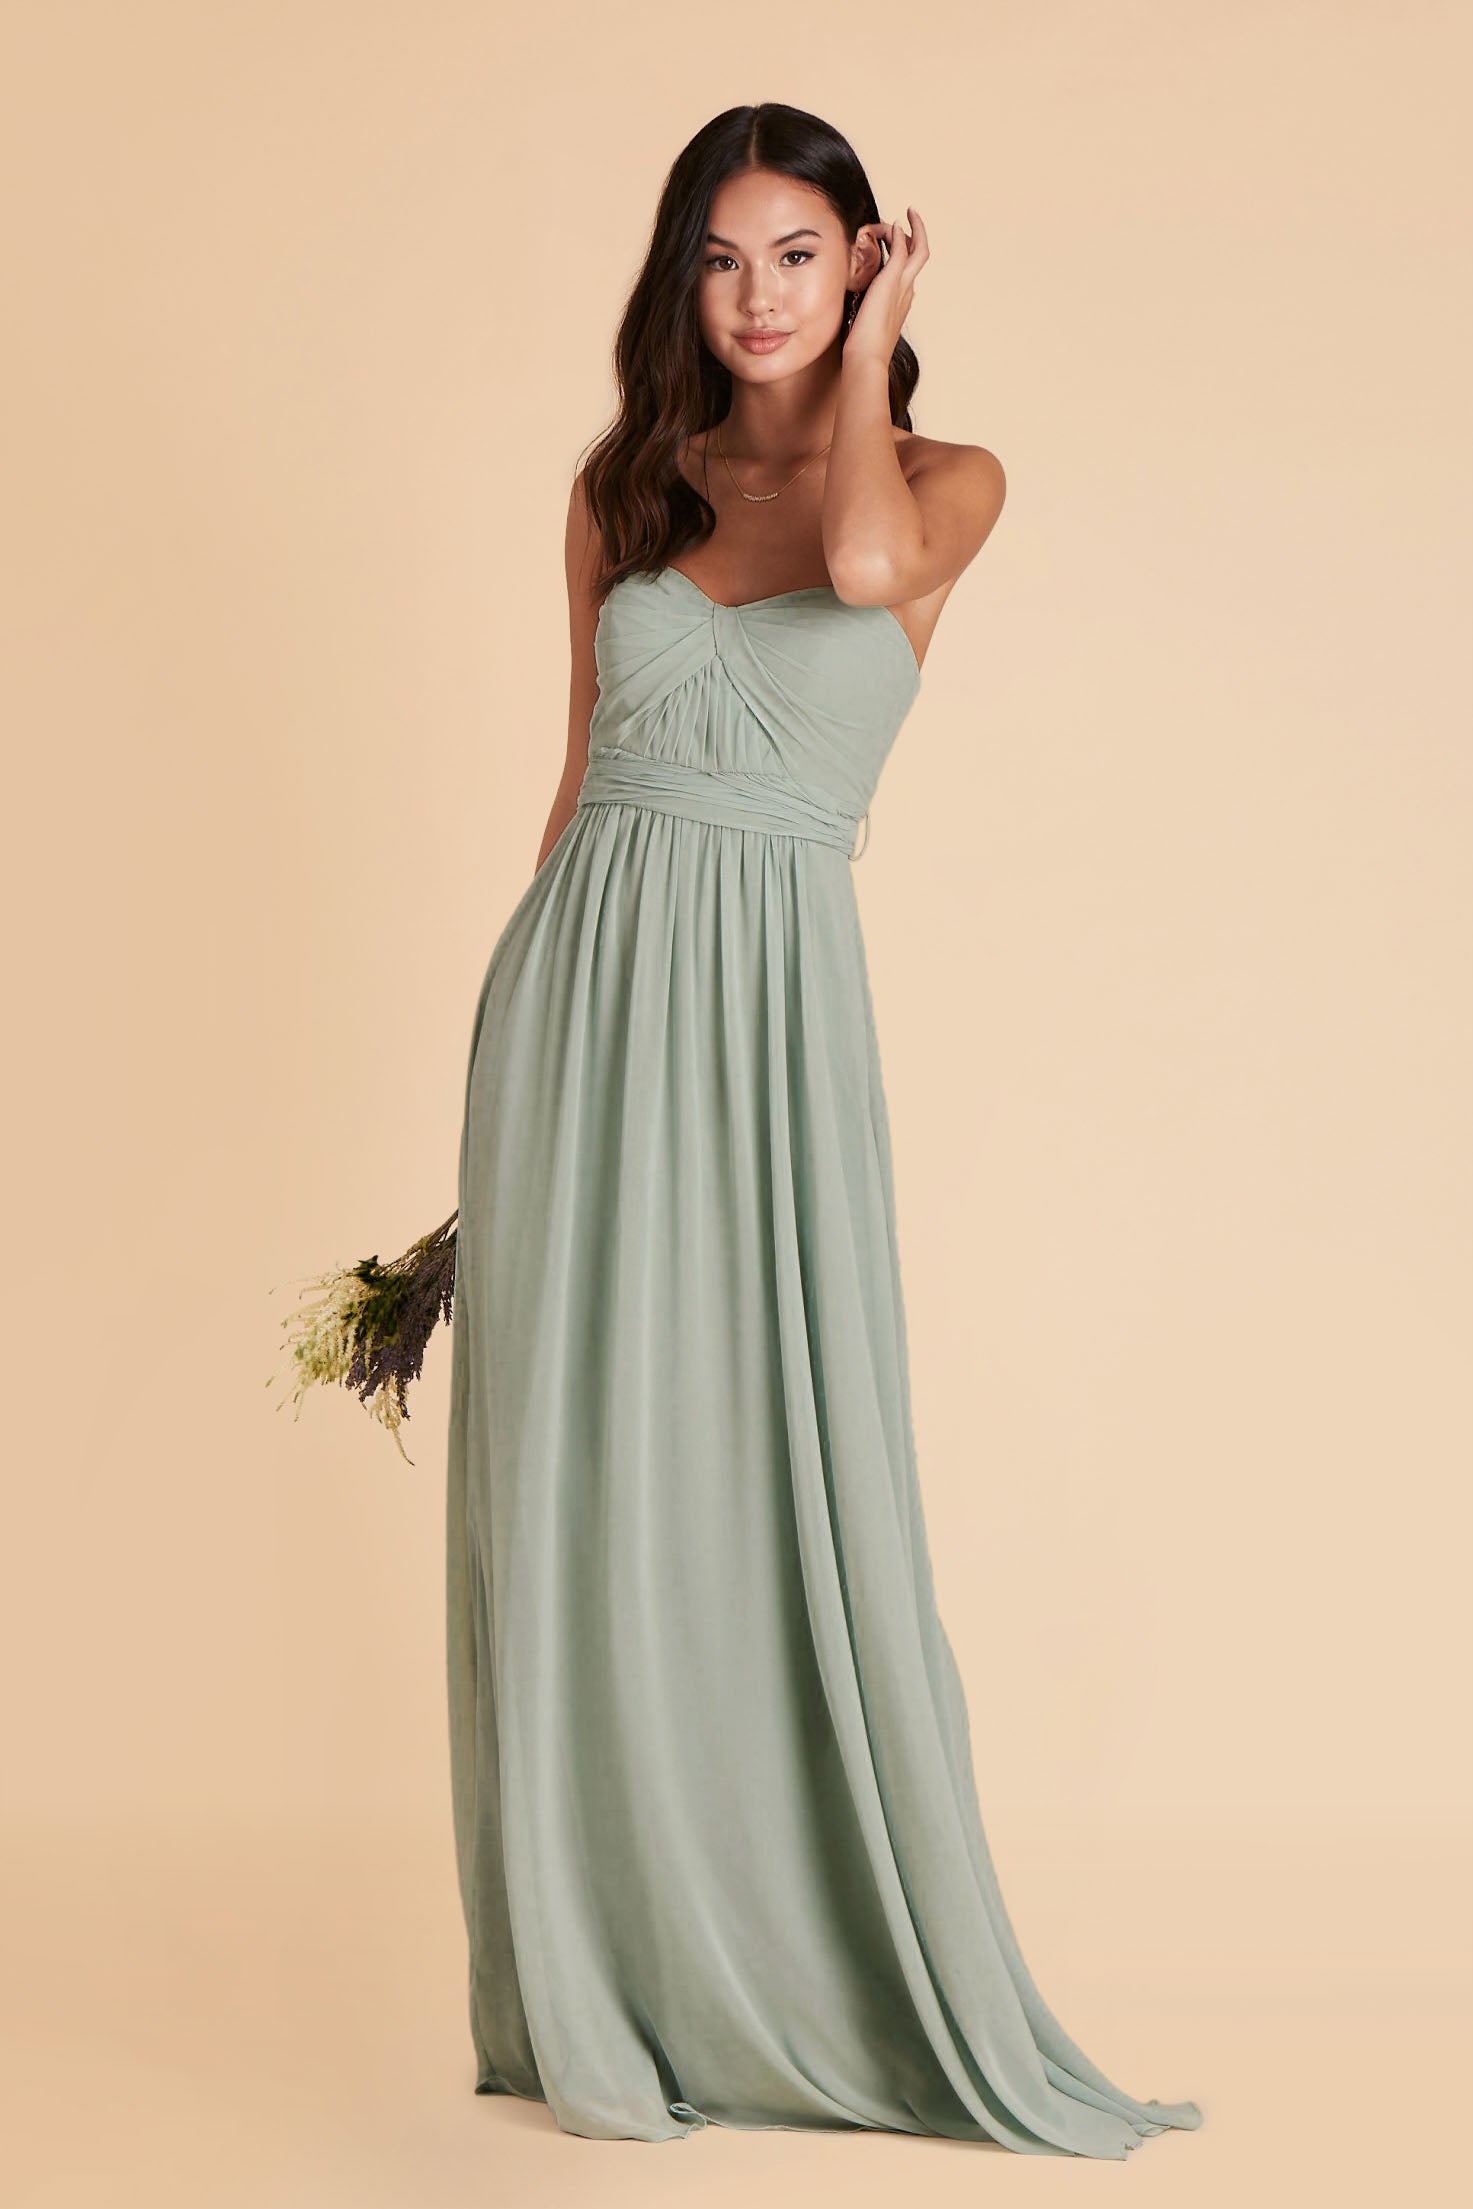 Affordable Bridesmaid Dresses under £50 - Ever-Pretty UK